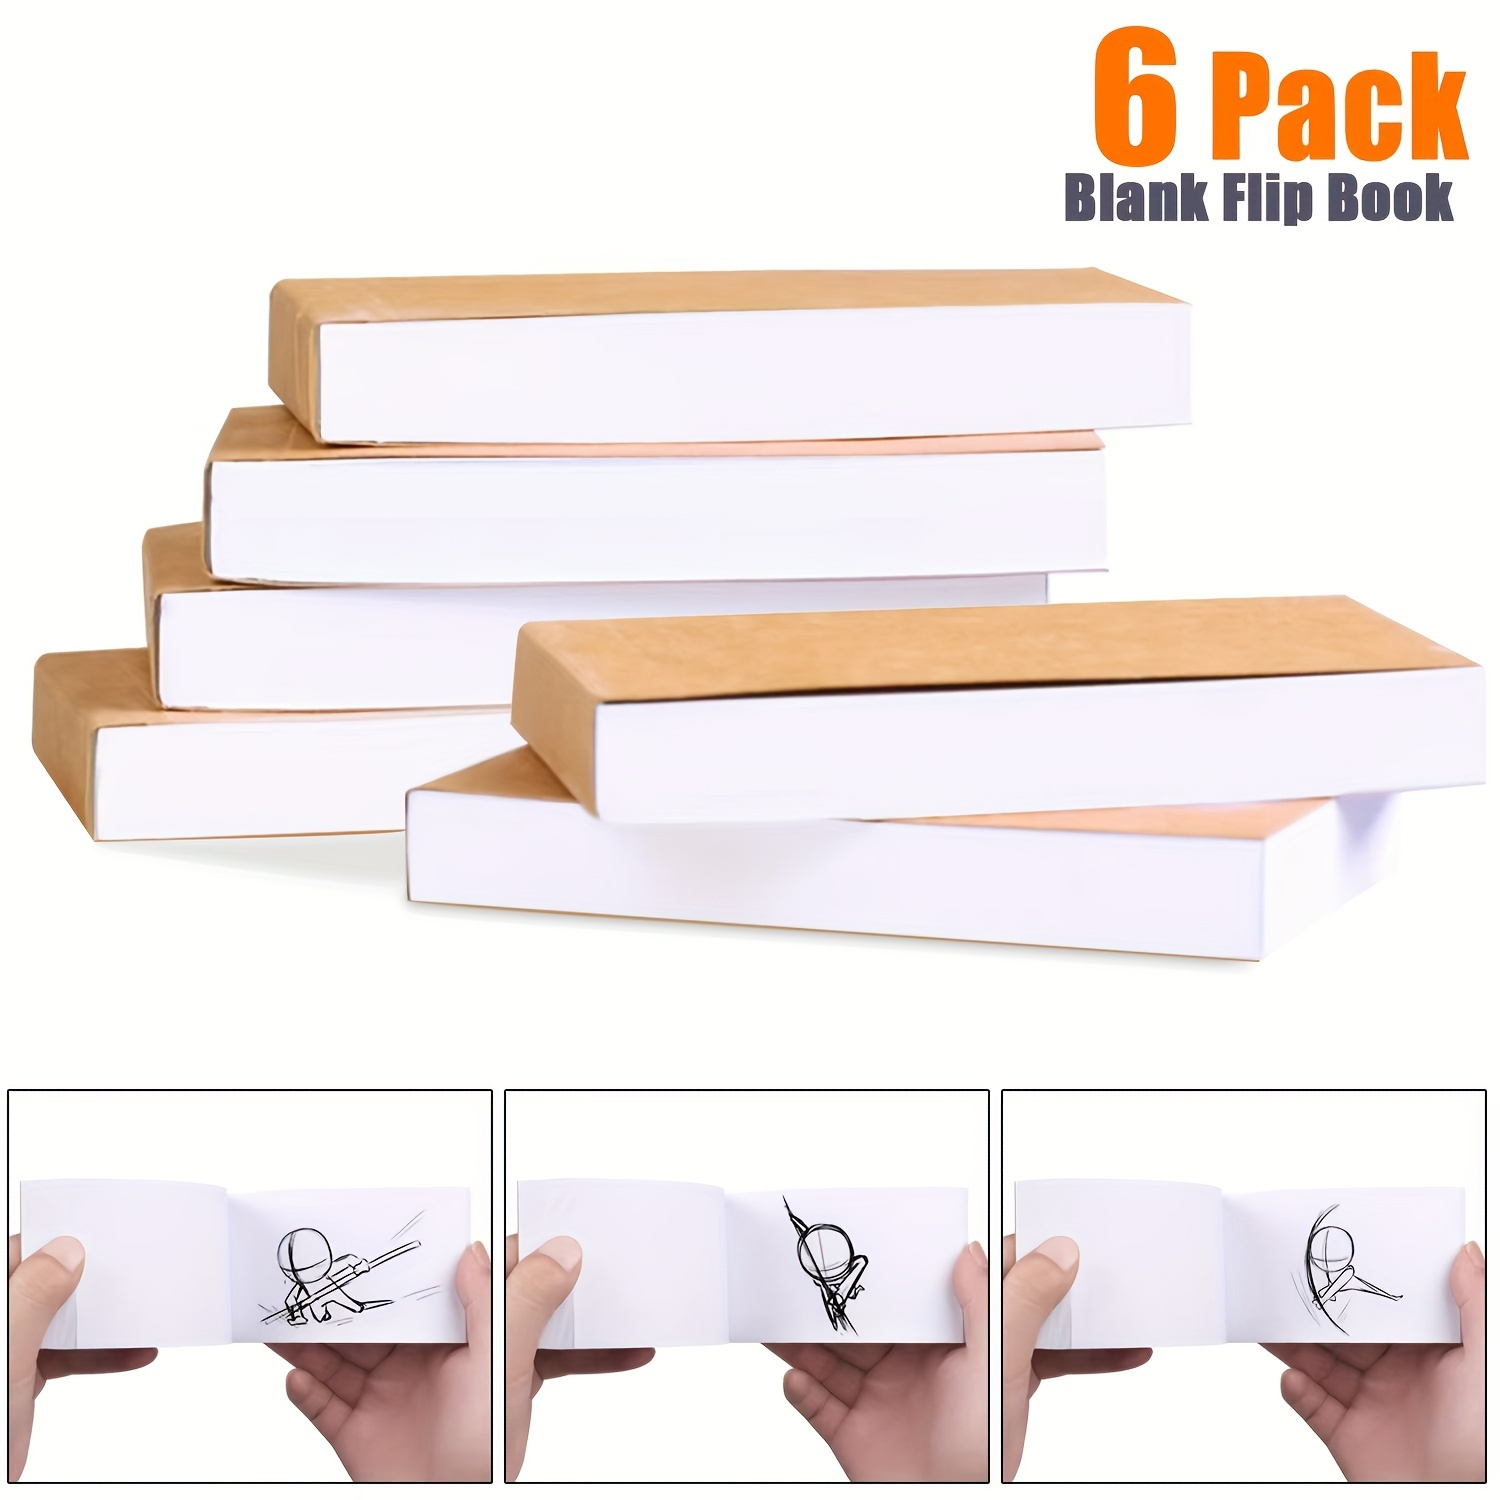 Premium Blank Flip Books for Kids and Adults – 6 Pack Flip Book